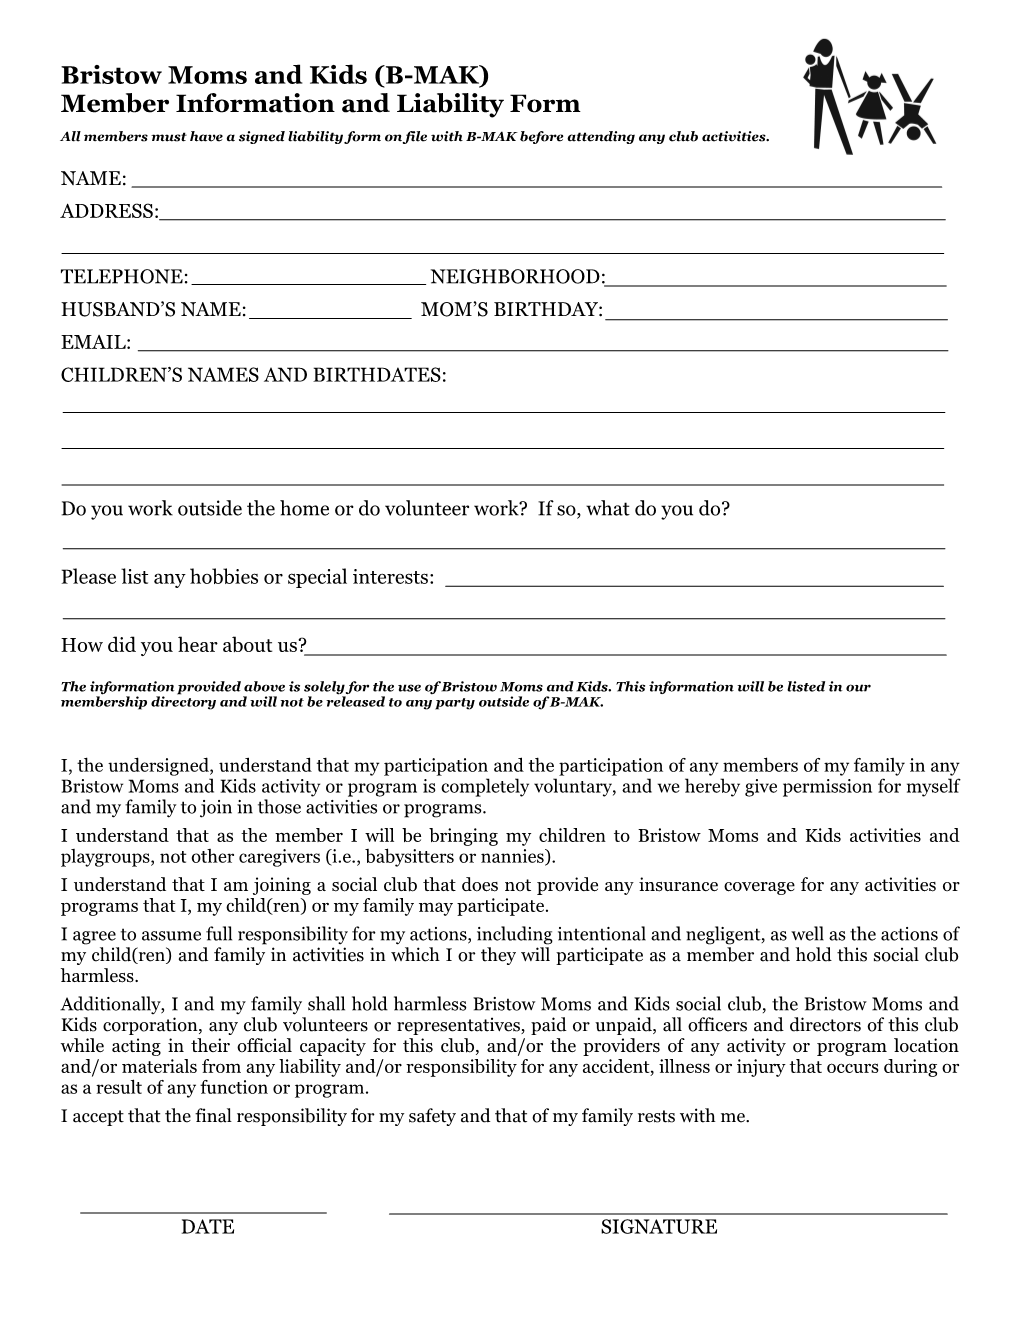 New Waiver Liability Form